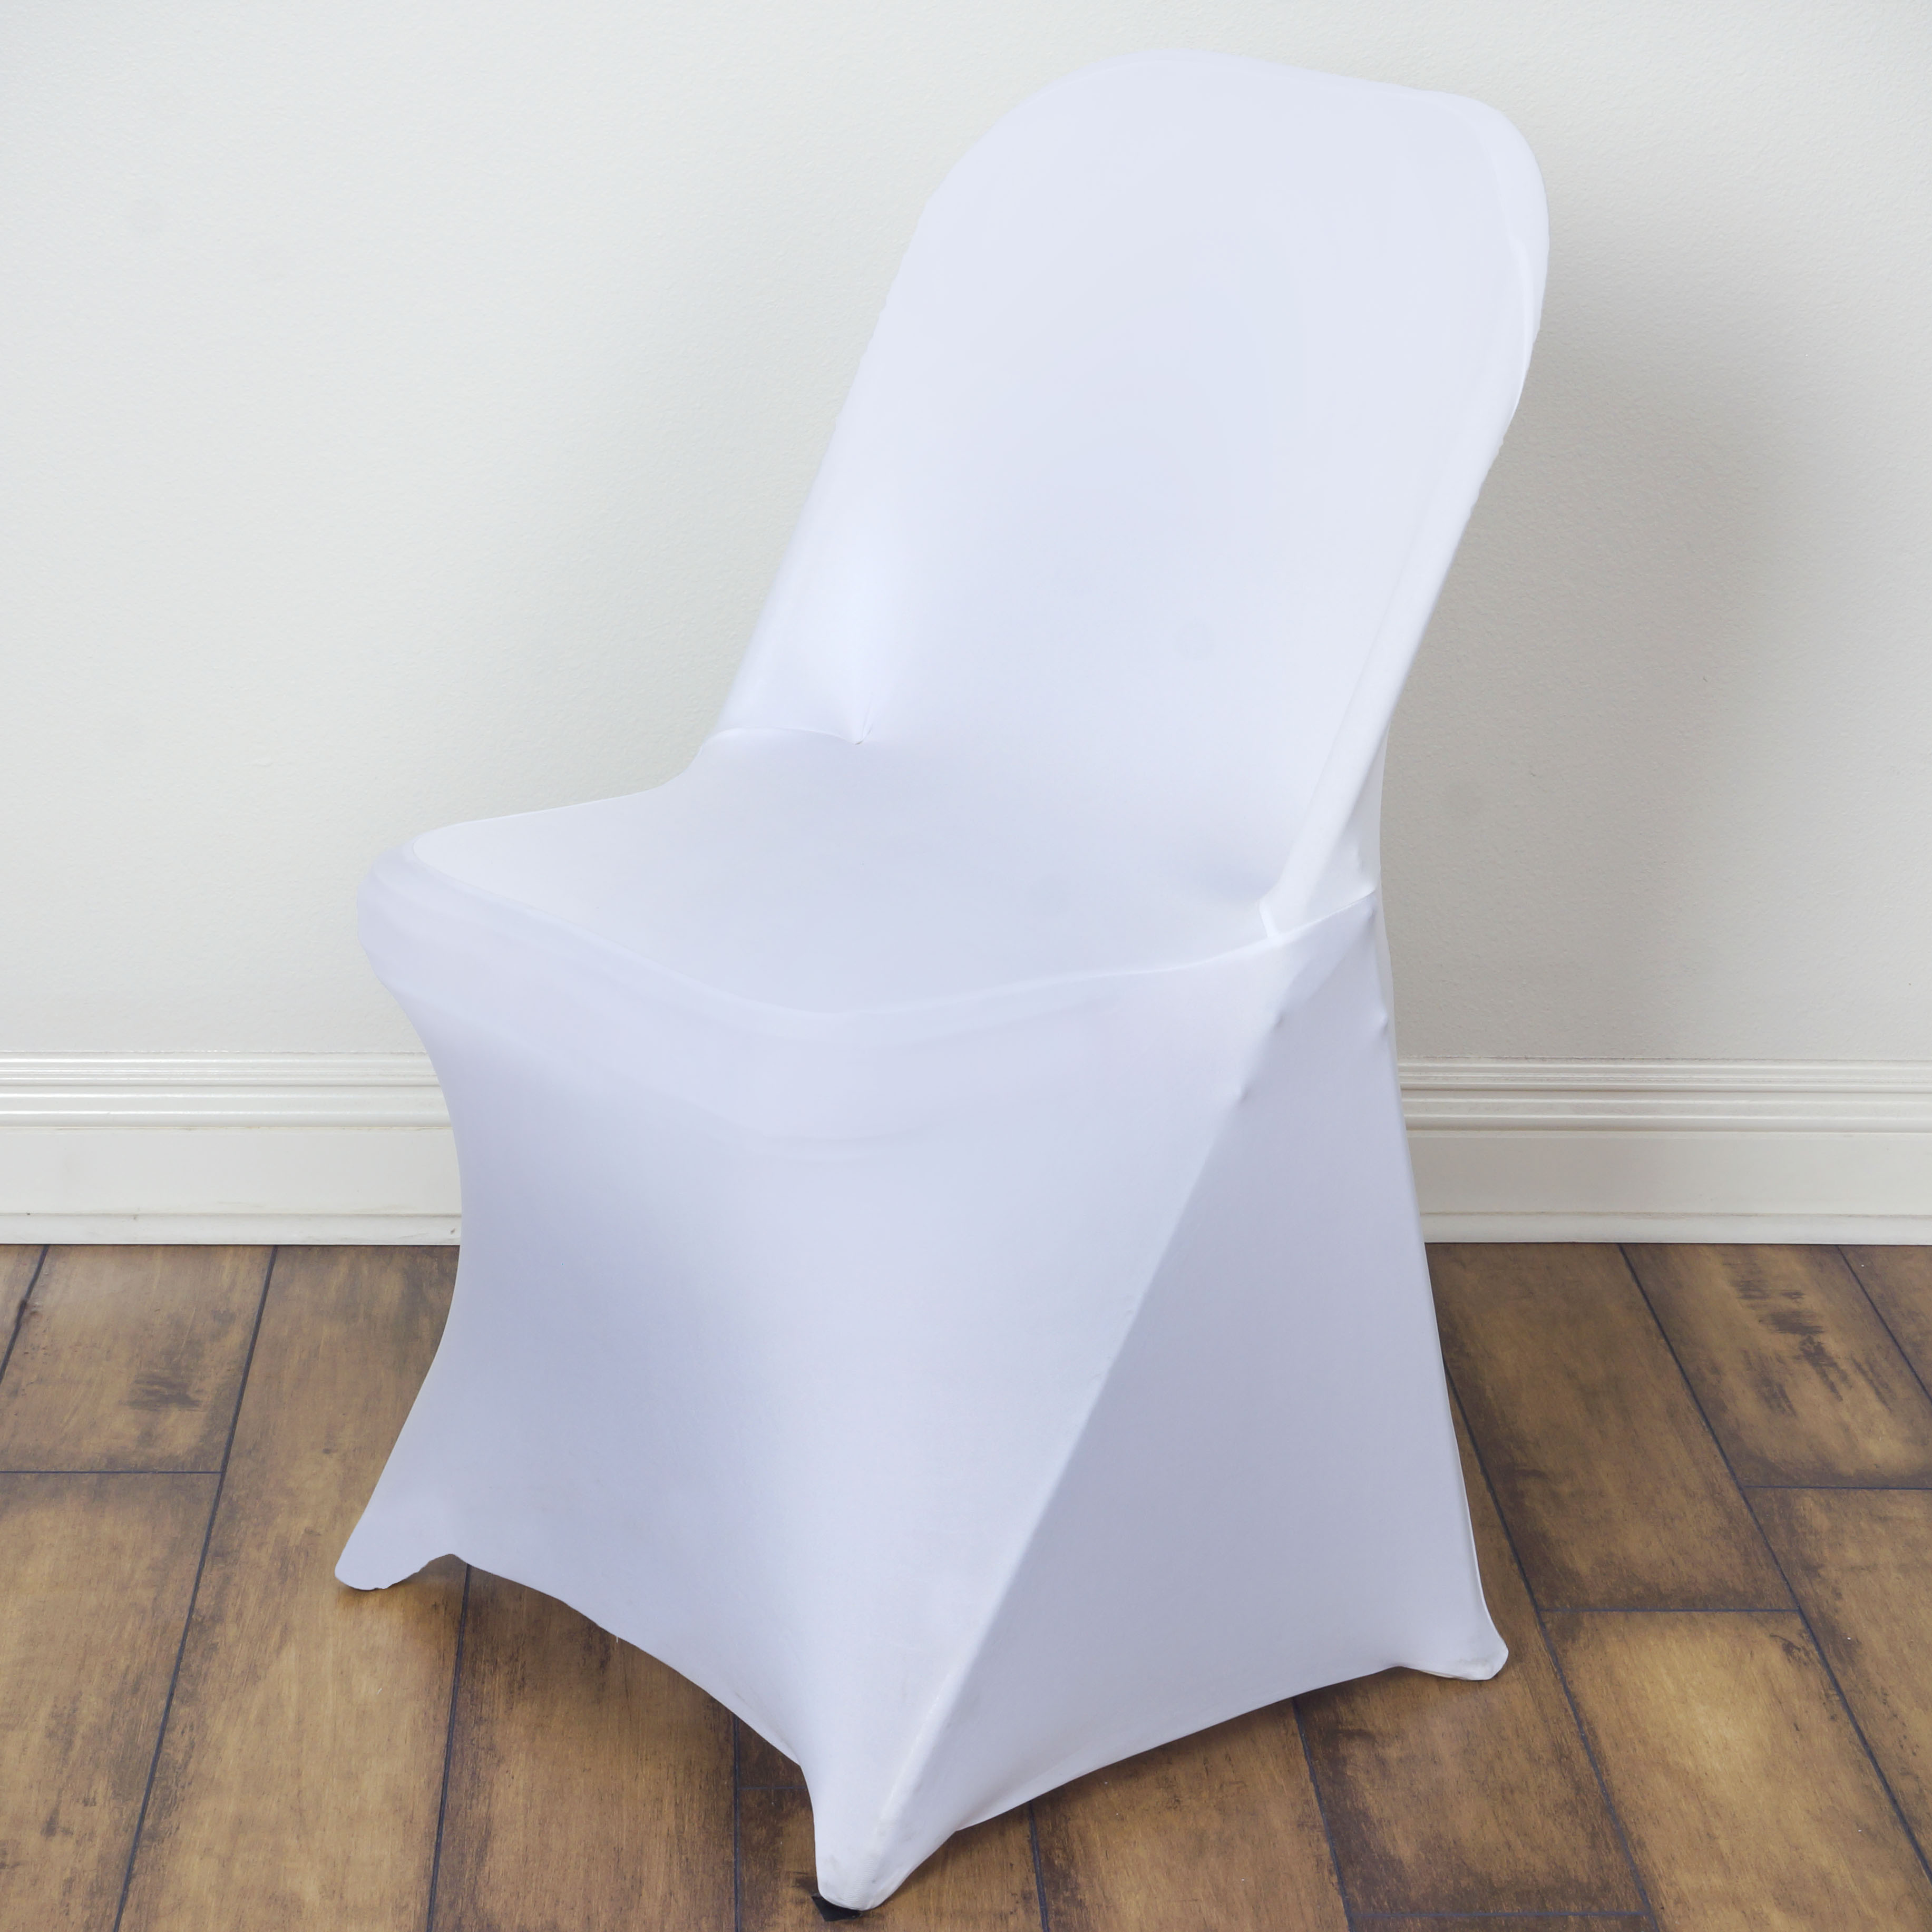 chair covers for folding chairs